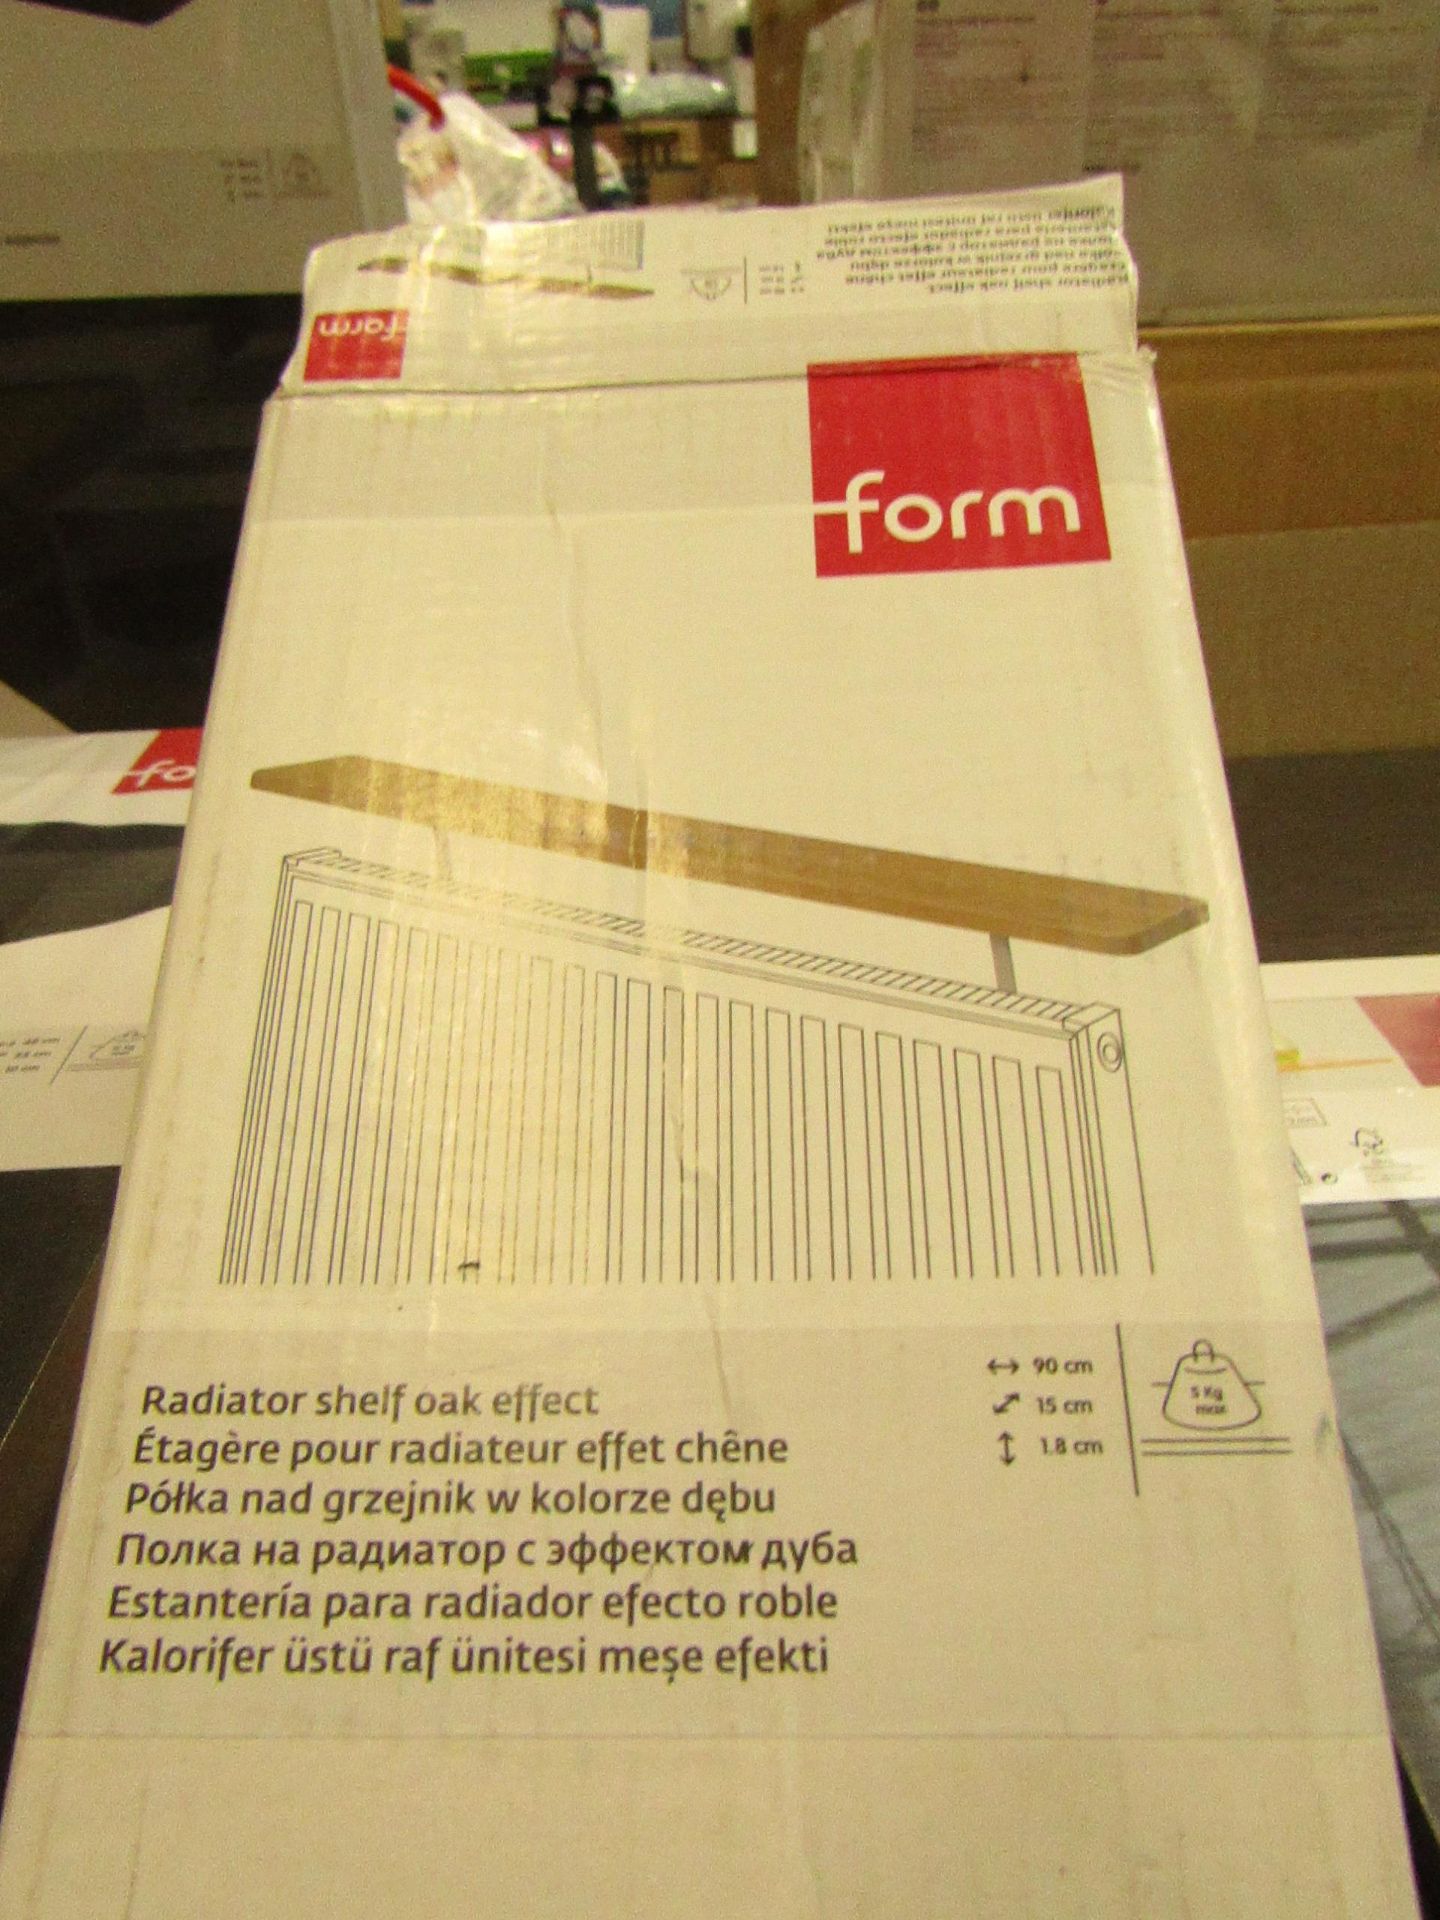 Form 90cm radiator shelf, unchecked and boxed